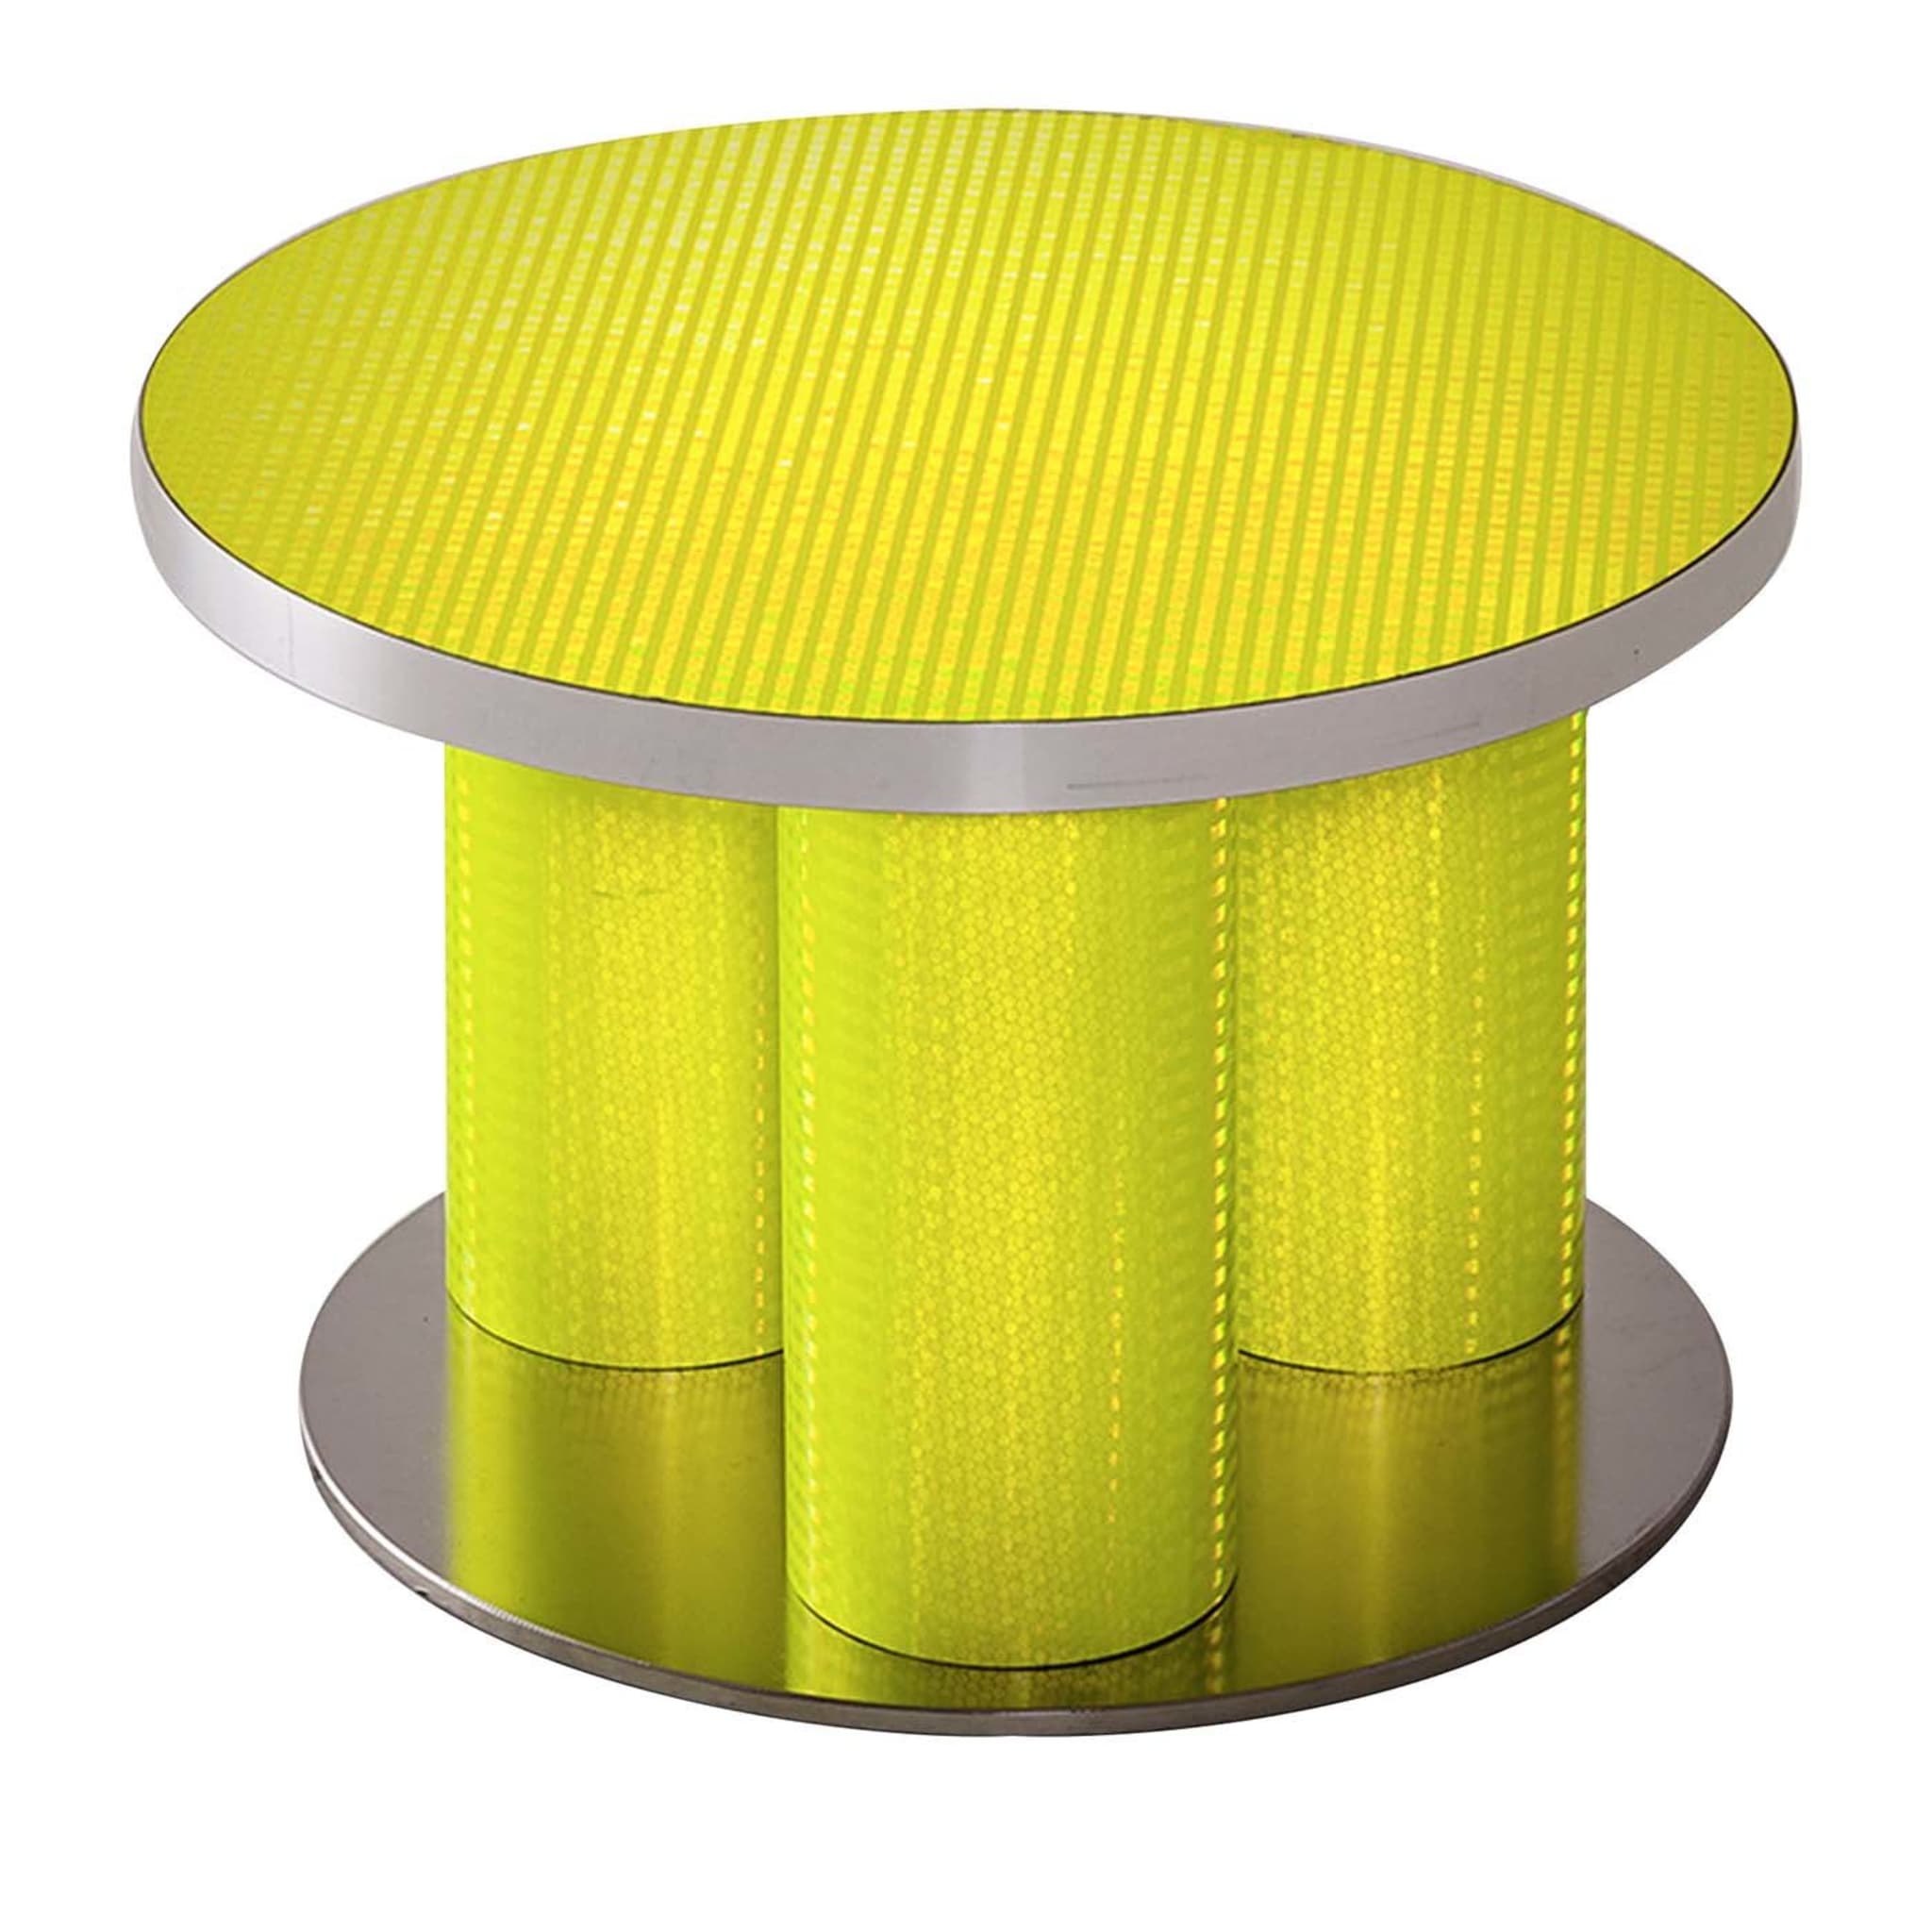 Reflective Collection - Yellow round coffee table - Main view